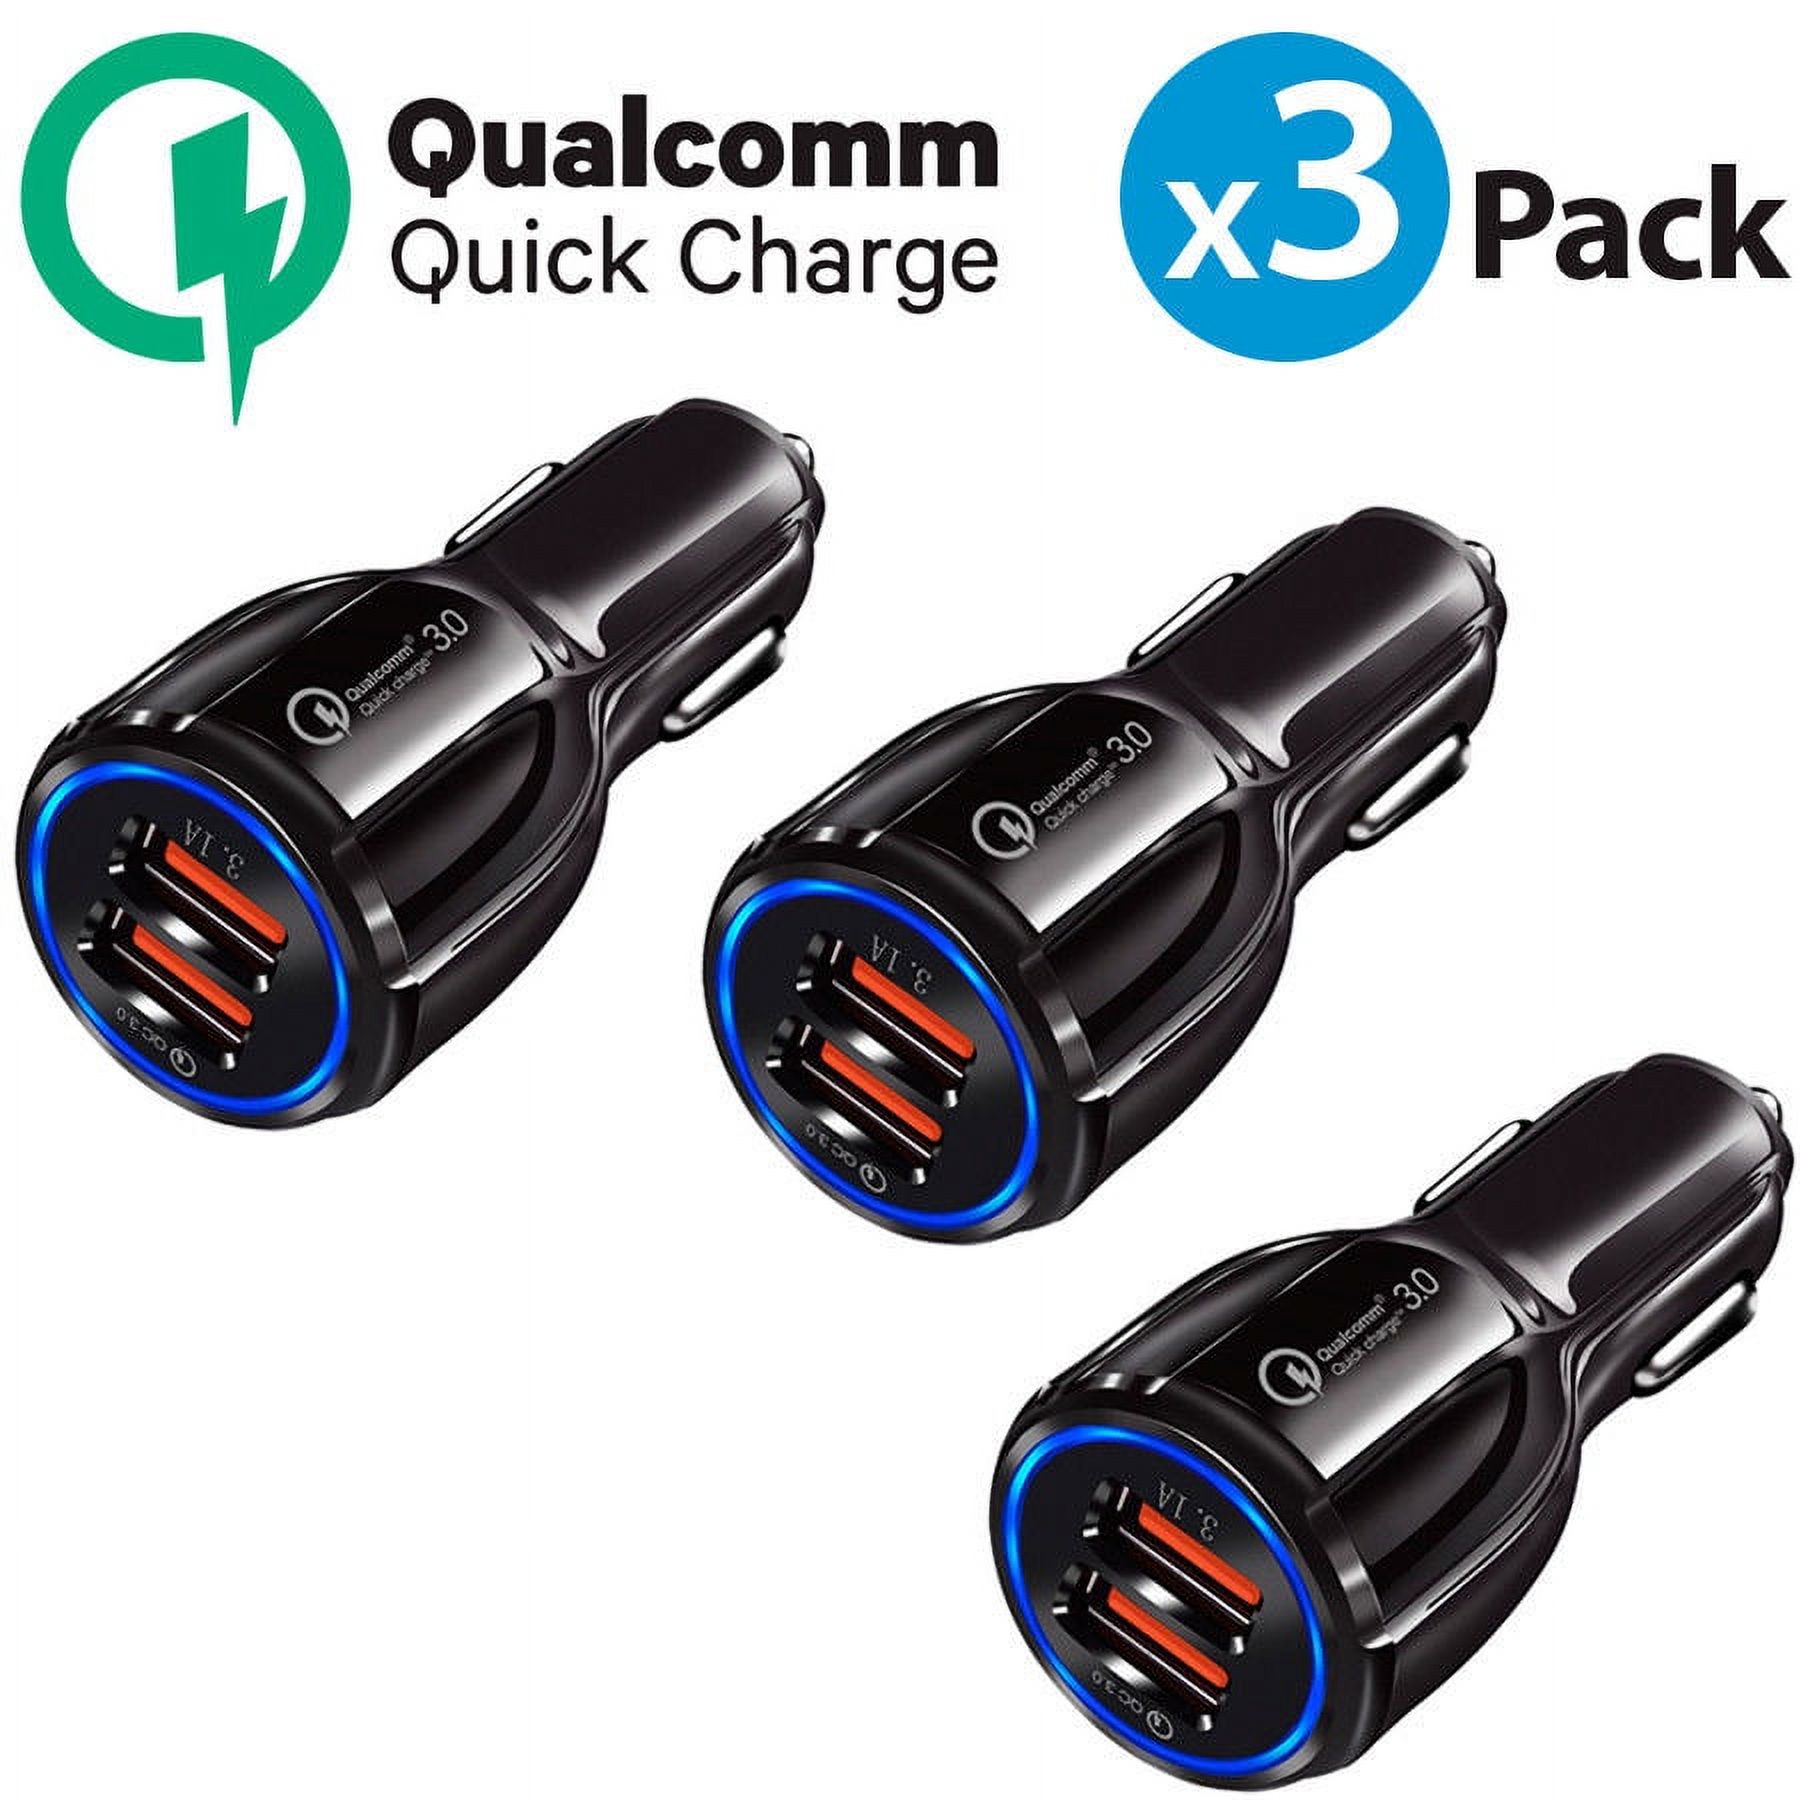 3 Pack Dual USB QualComm Quick Charge Car Charger Fast Dual-Port USB For iPhone X iPhone 8 Plus Samsung Galaxy S8 S8+ Plus S9 S9+ Plus Note 9 S7 Edge Note 4 LG G7 OnePlus 5 Google Pixel 2 XL Black - image 1 of 10